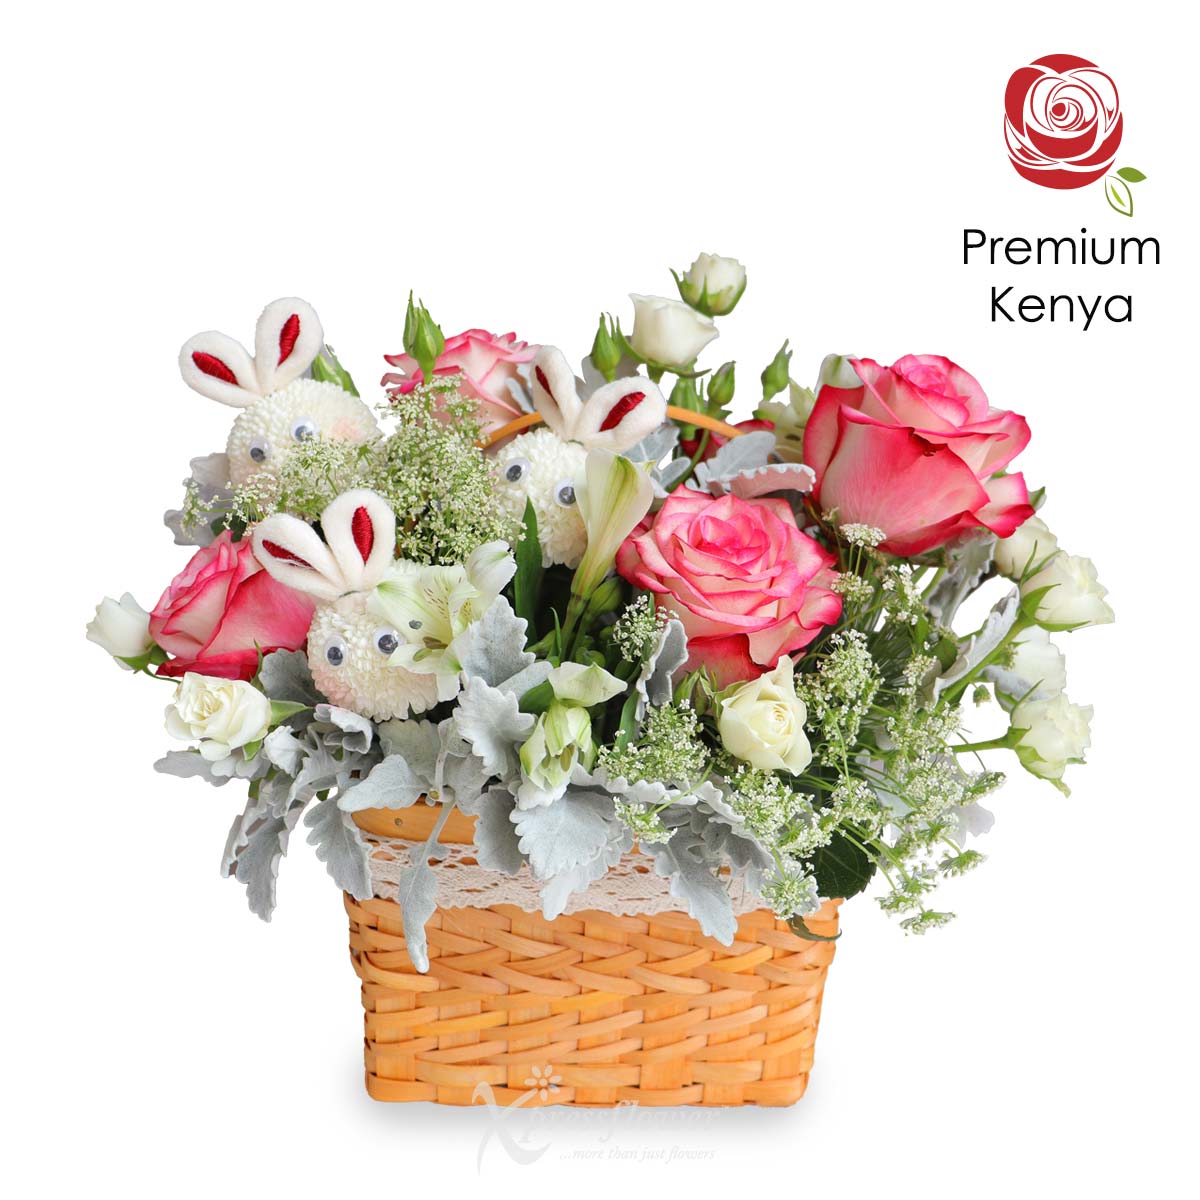 Bunny Blossoms (5 Two-Toned Pink Roses with White Bunny Ping Pong Flowers Basket Arrangement)